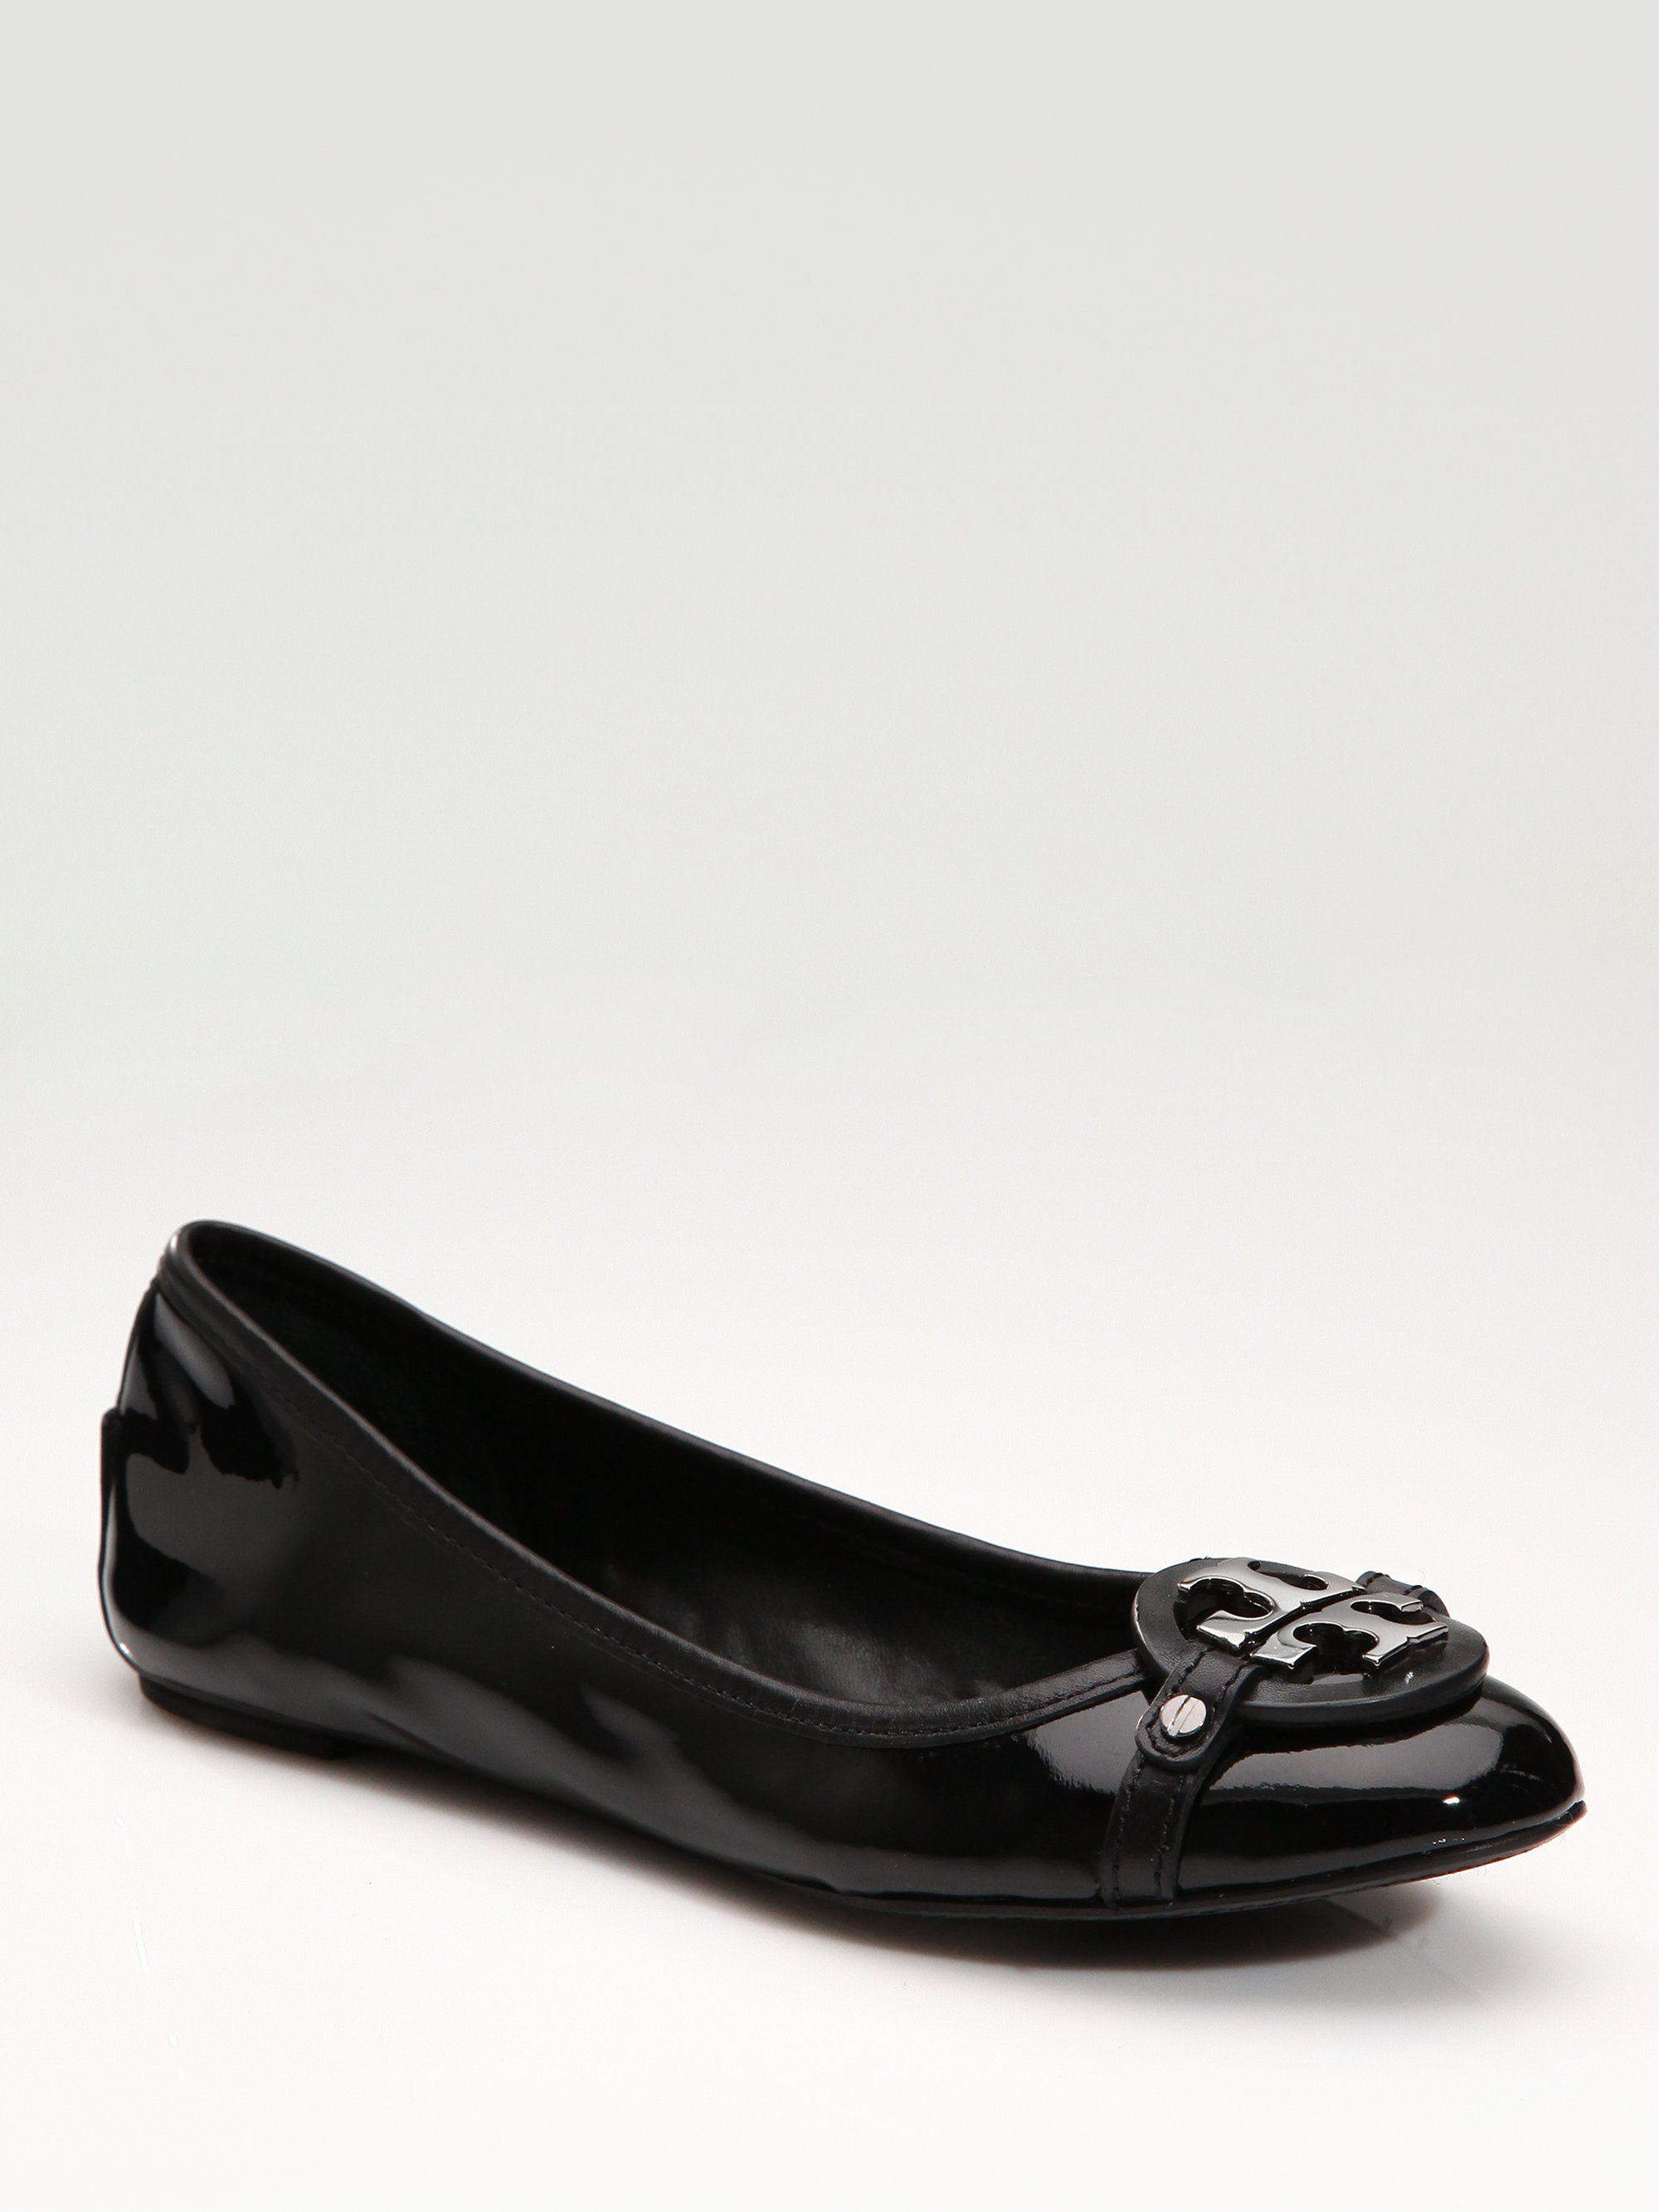 Tory burch Patent Leather Ballet Flats in Black | Lyst